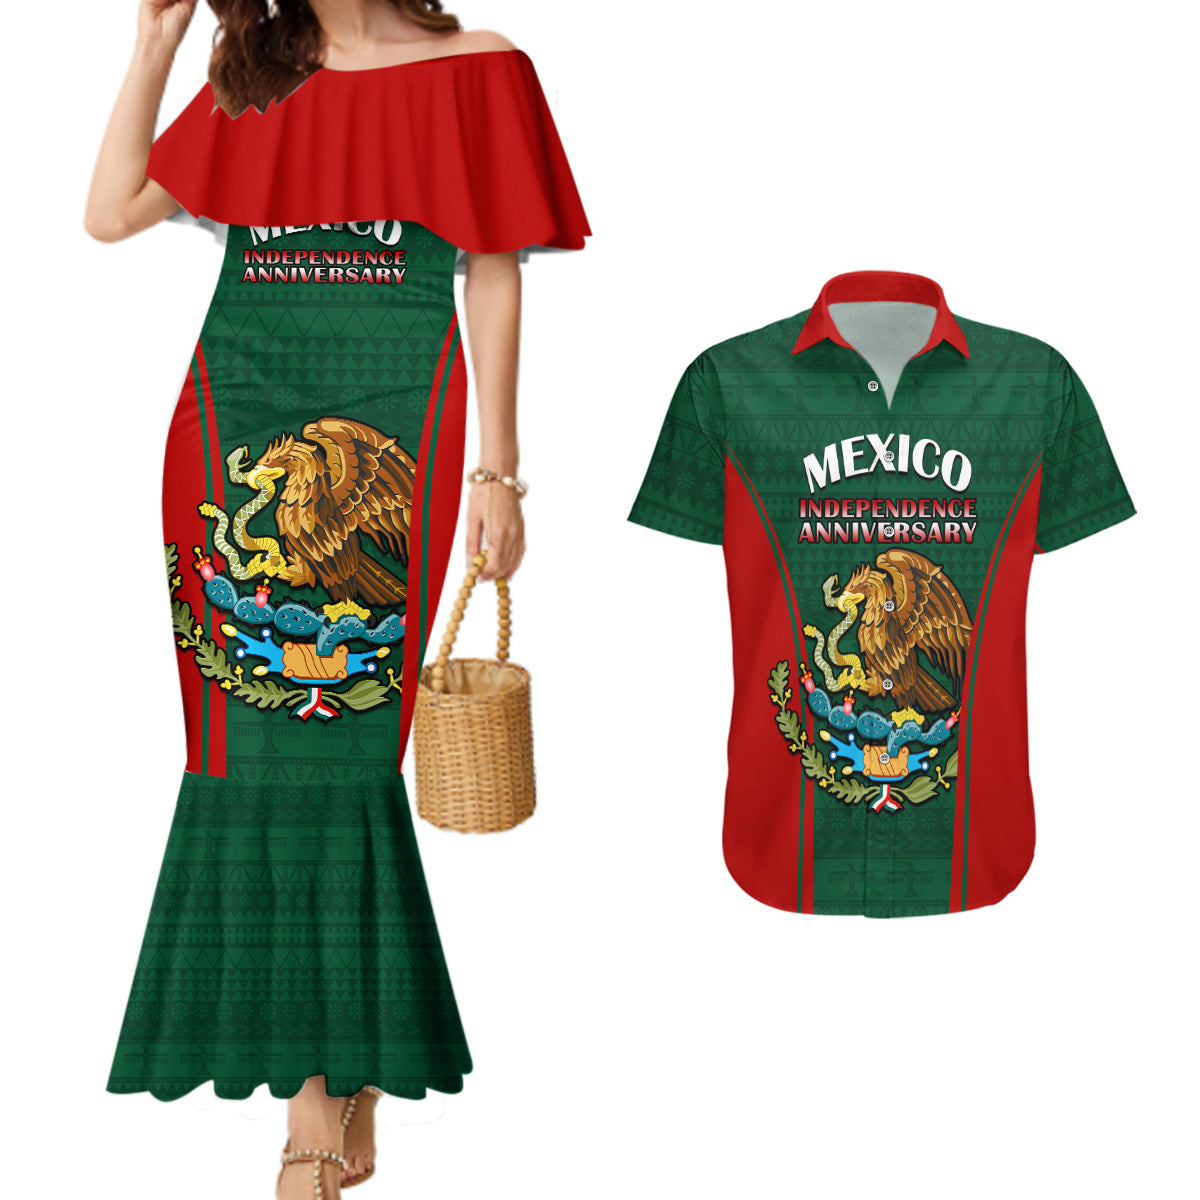 mexico-independence-day-couples-matching-mermaid-dress-and-hawaiian-shirt-happy-213th-anniversary-mexican-proud